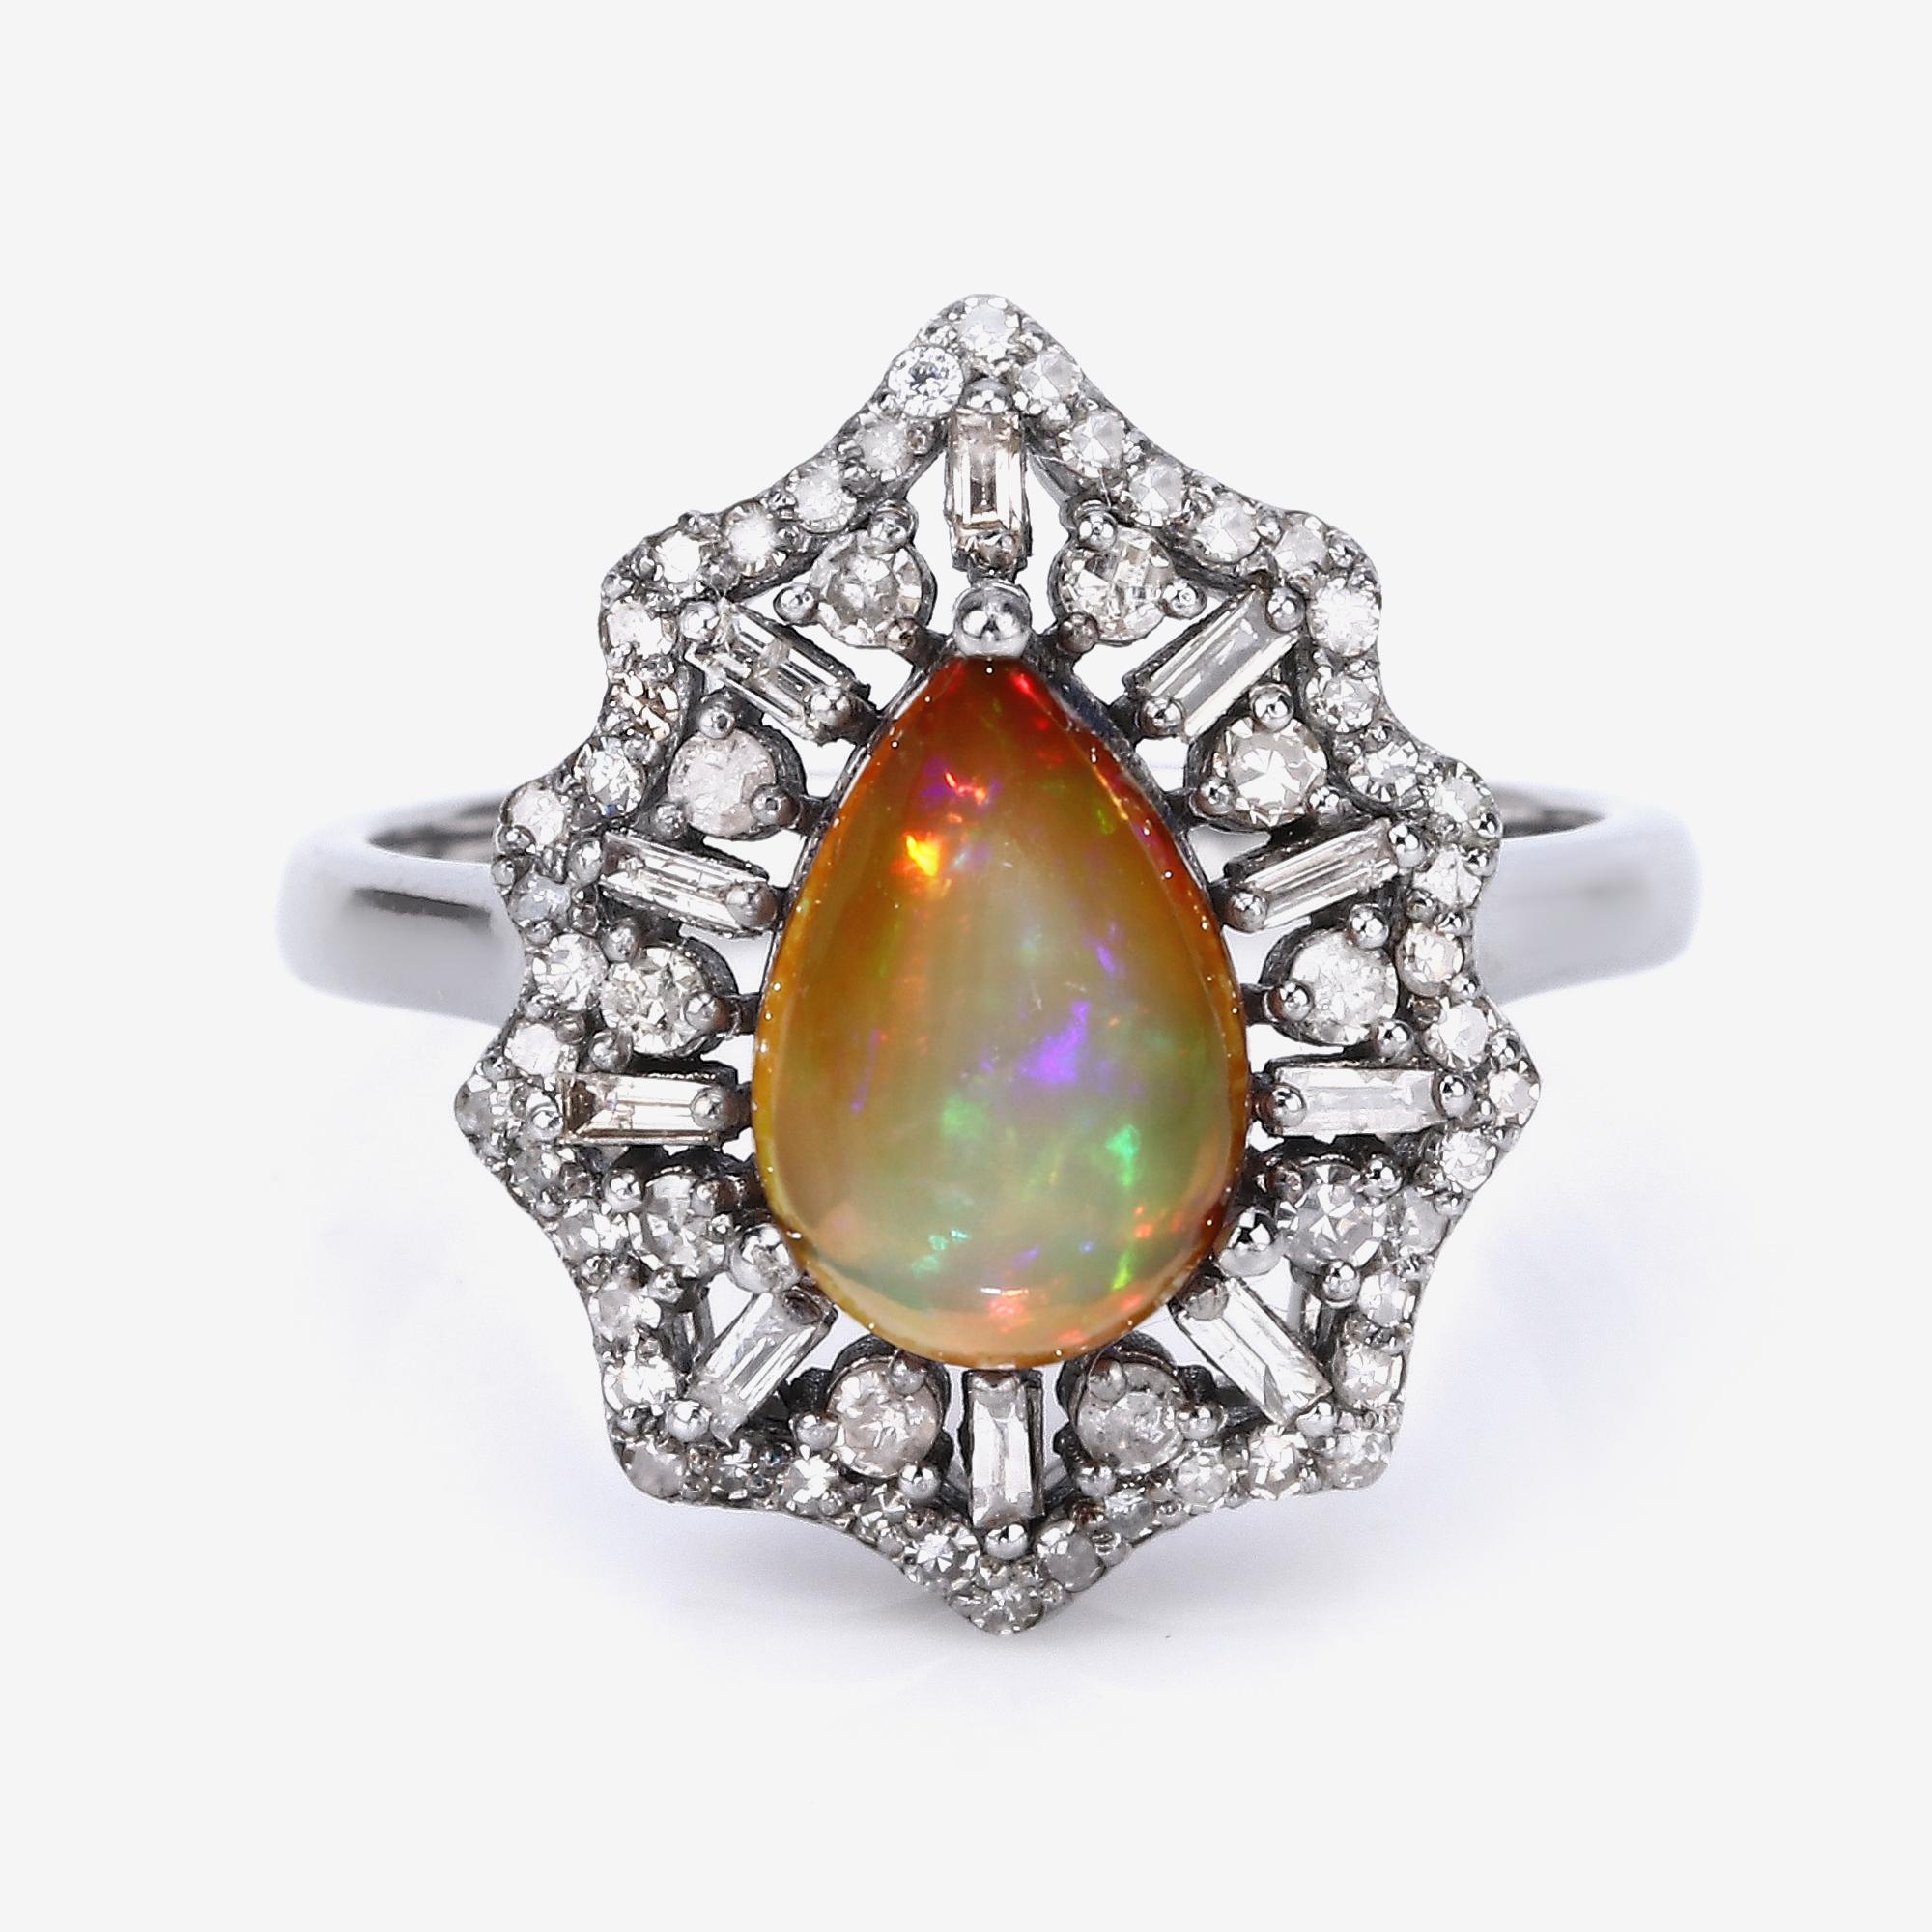 1.30cttw Ethiopian Opal with Diamonds 0.66cttw Sterling Silver Ring 2